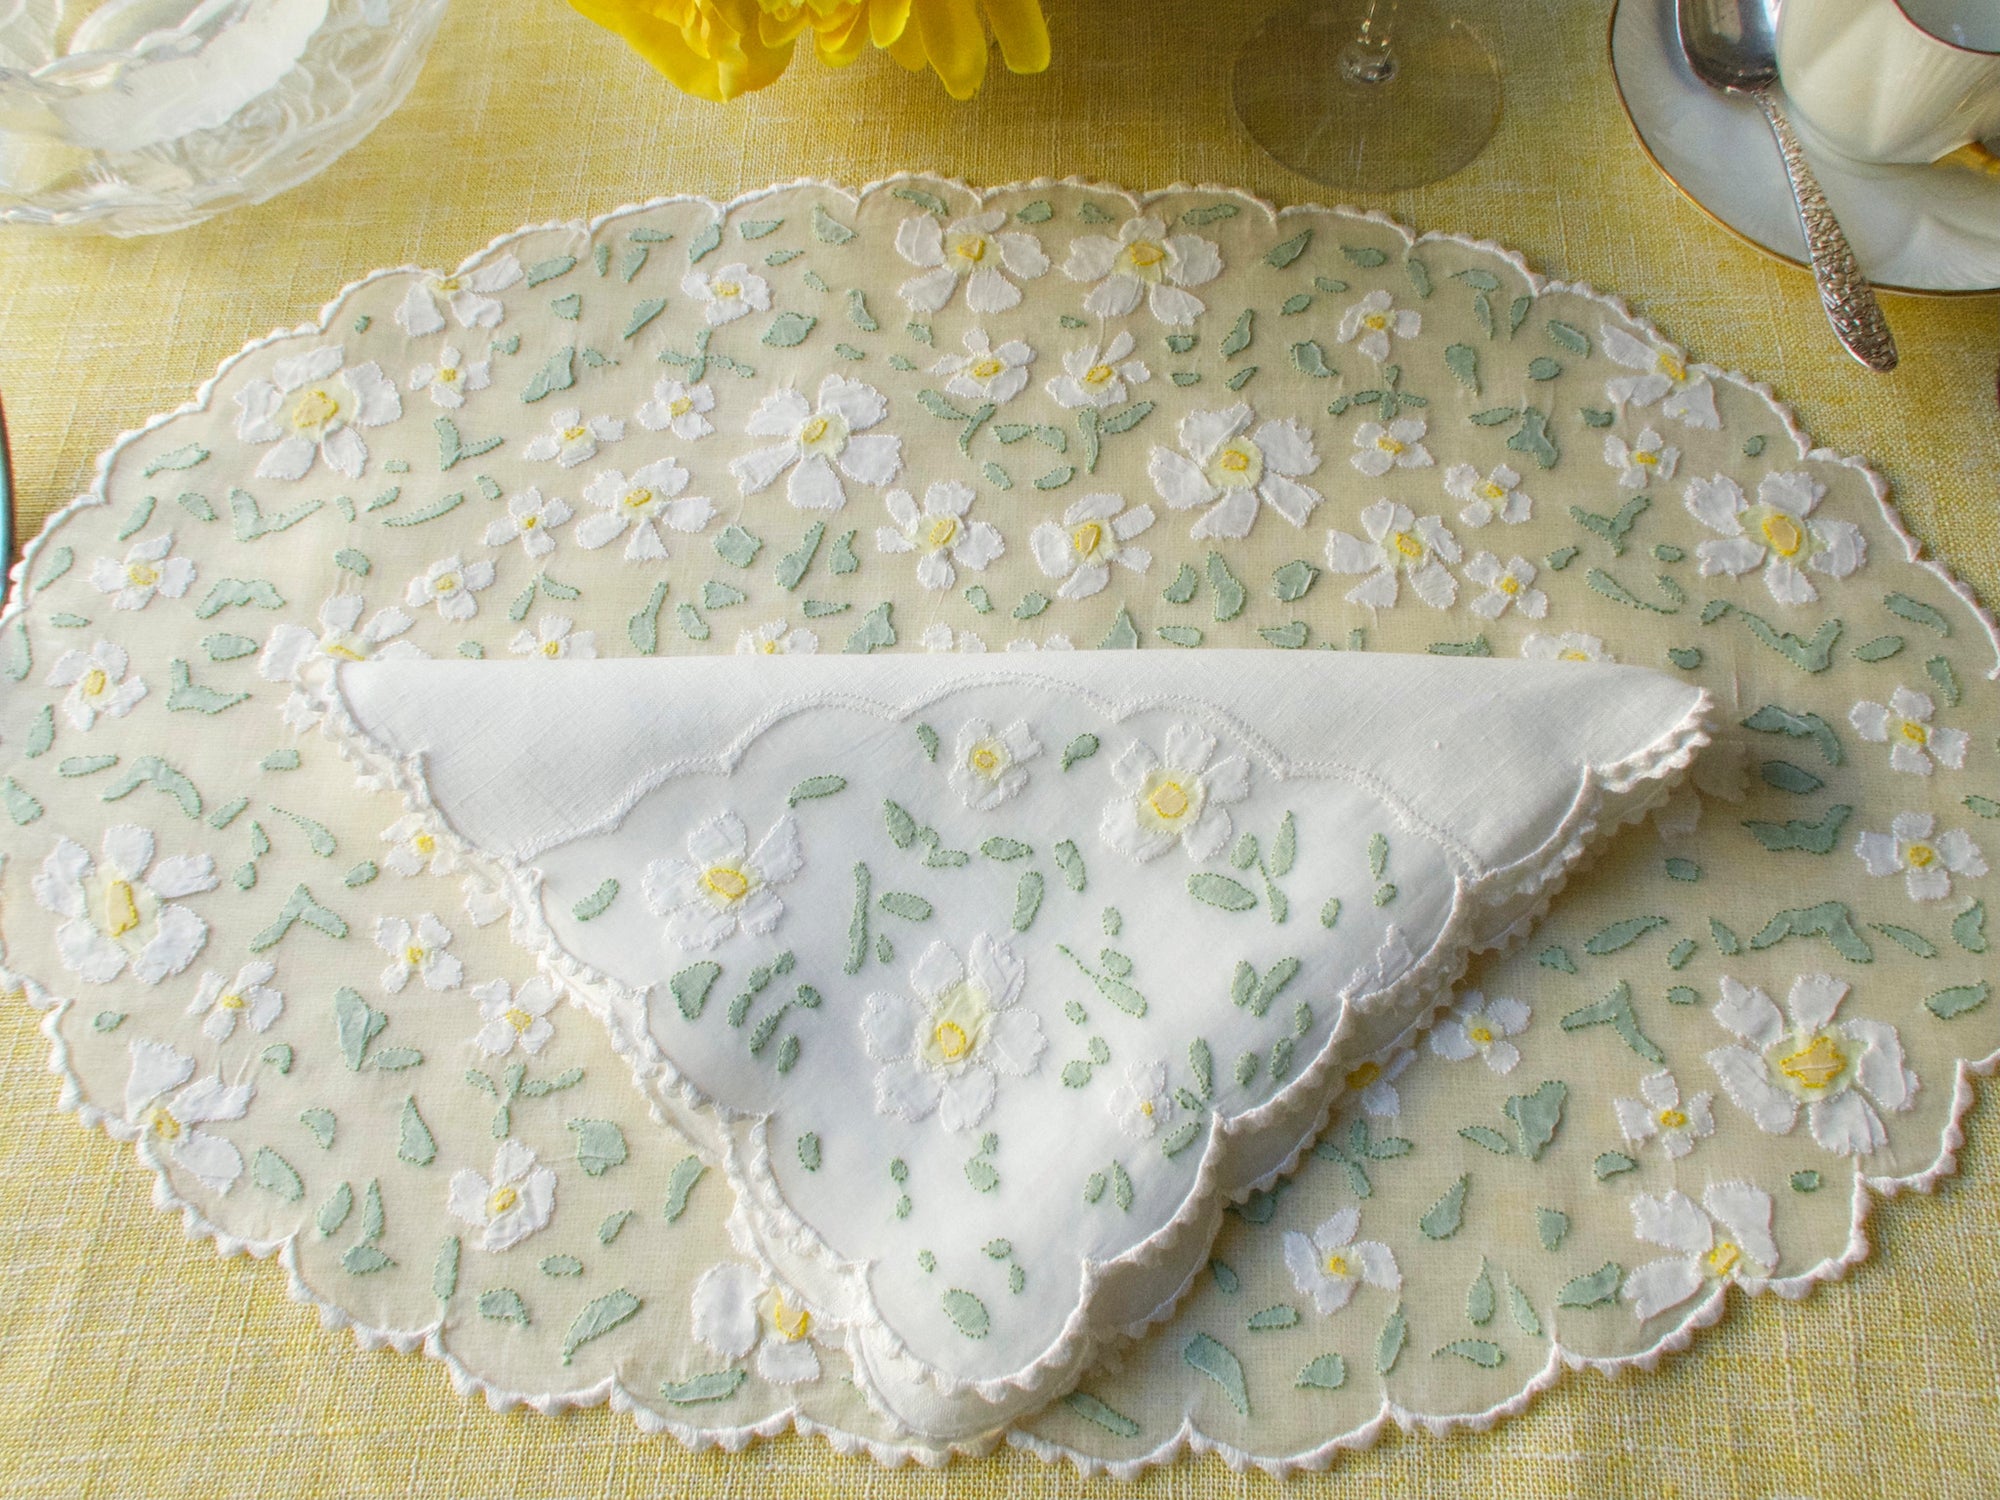 Daisies Vintage Madeira Organdy 16pc Oval Placemat Set for 8